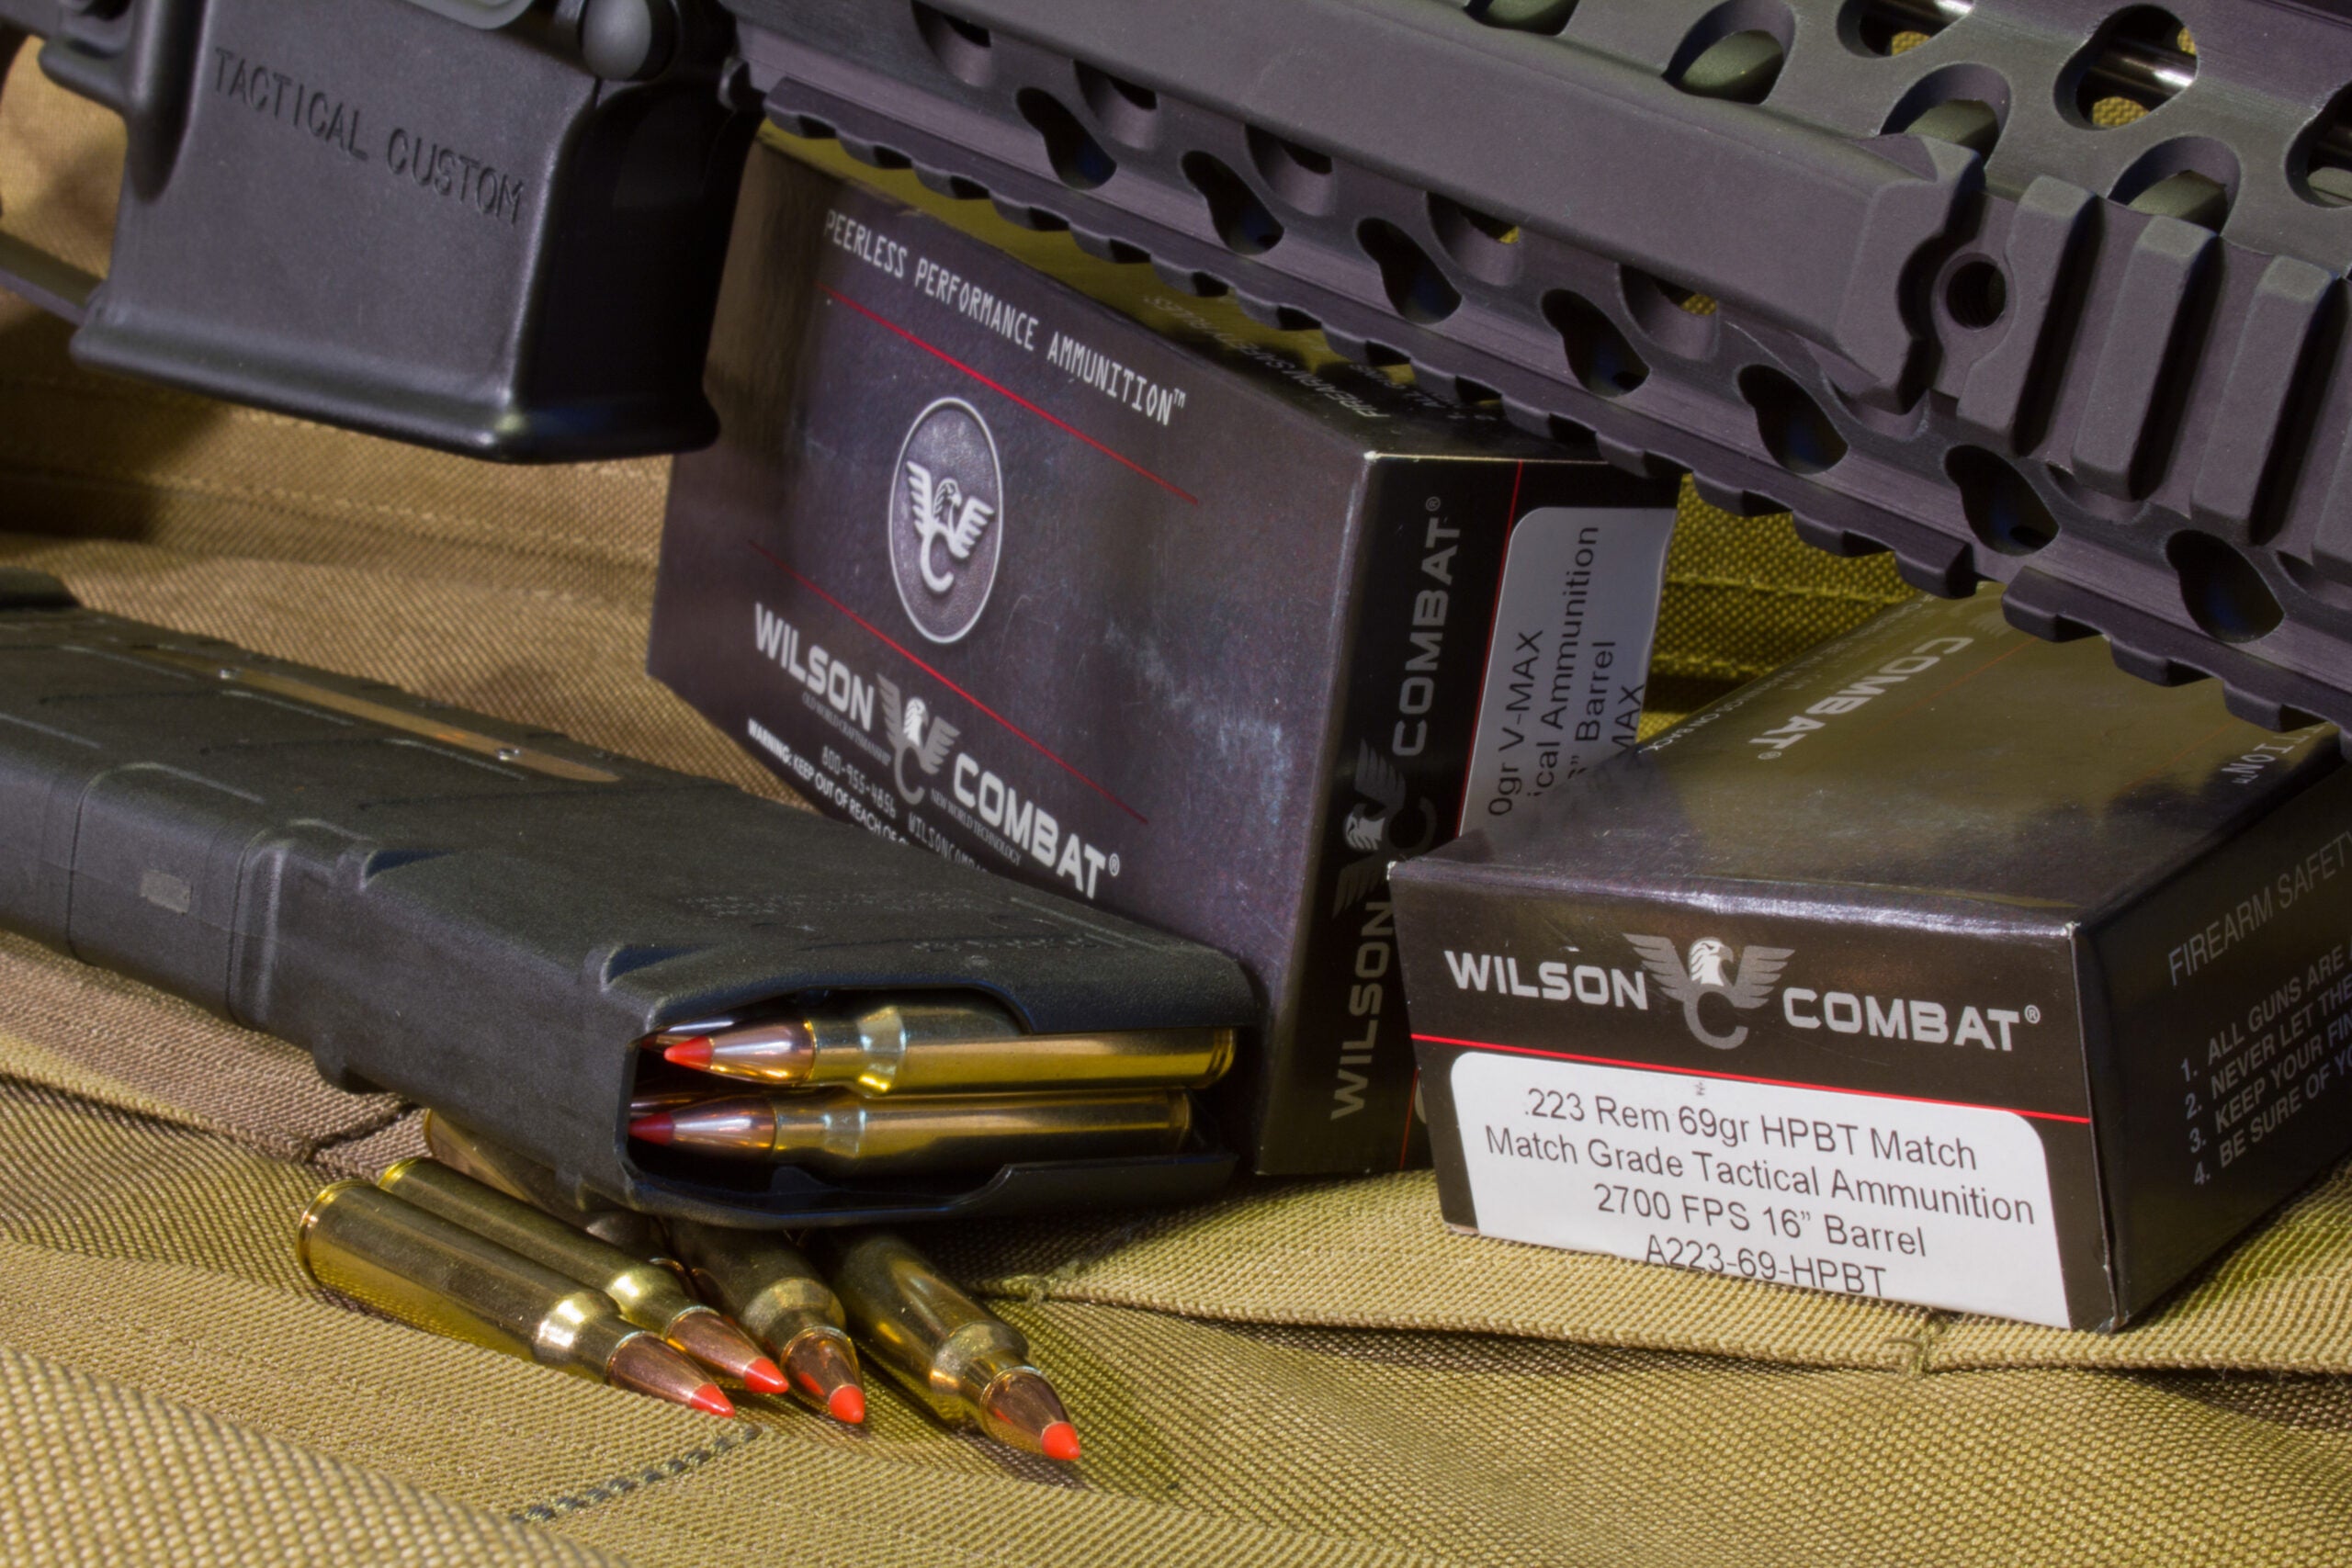 Photo of .223 Remington ammunition loaded in a 5.56 NATO rifle